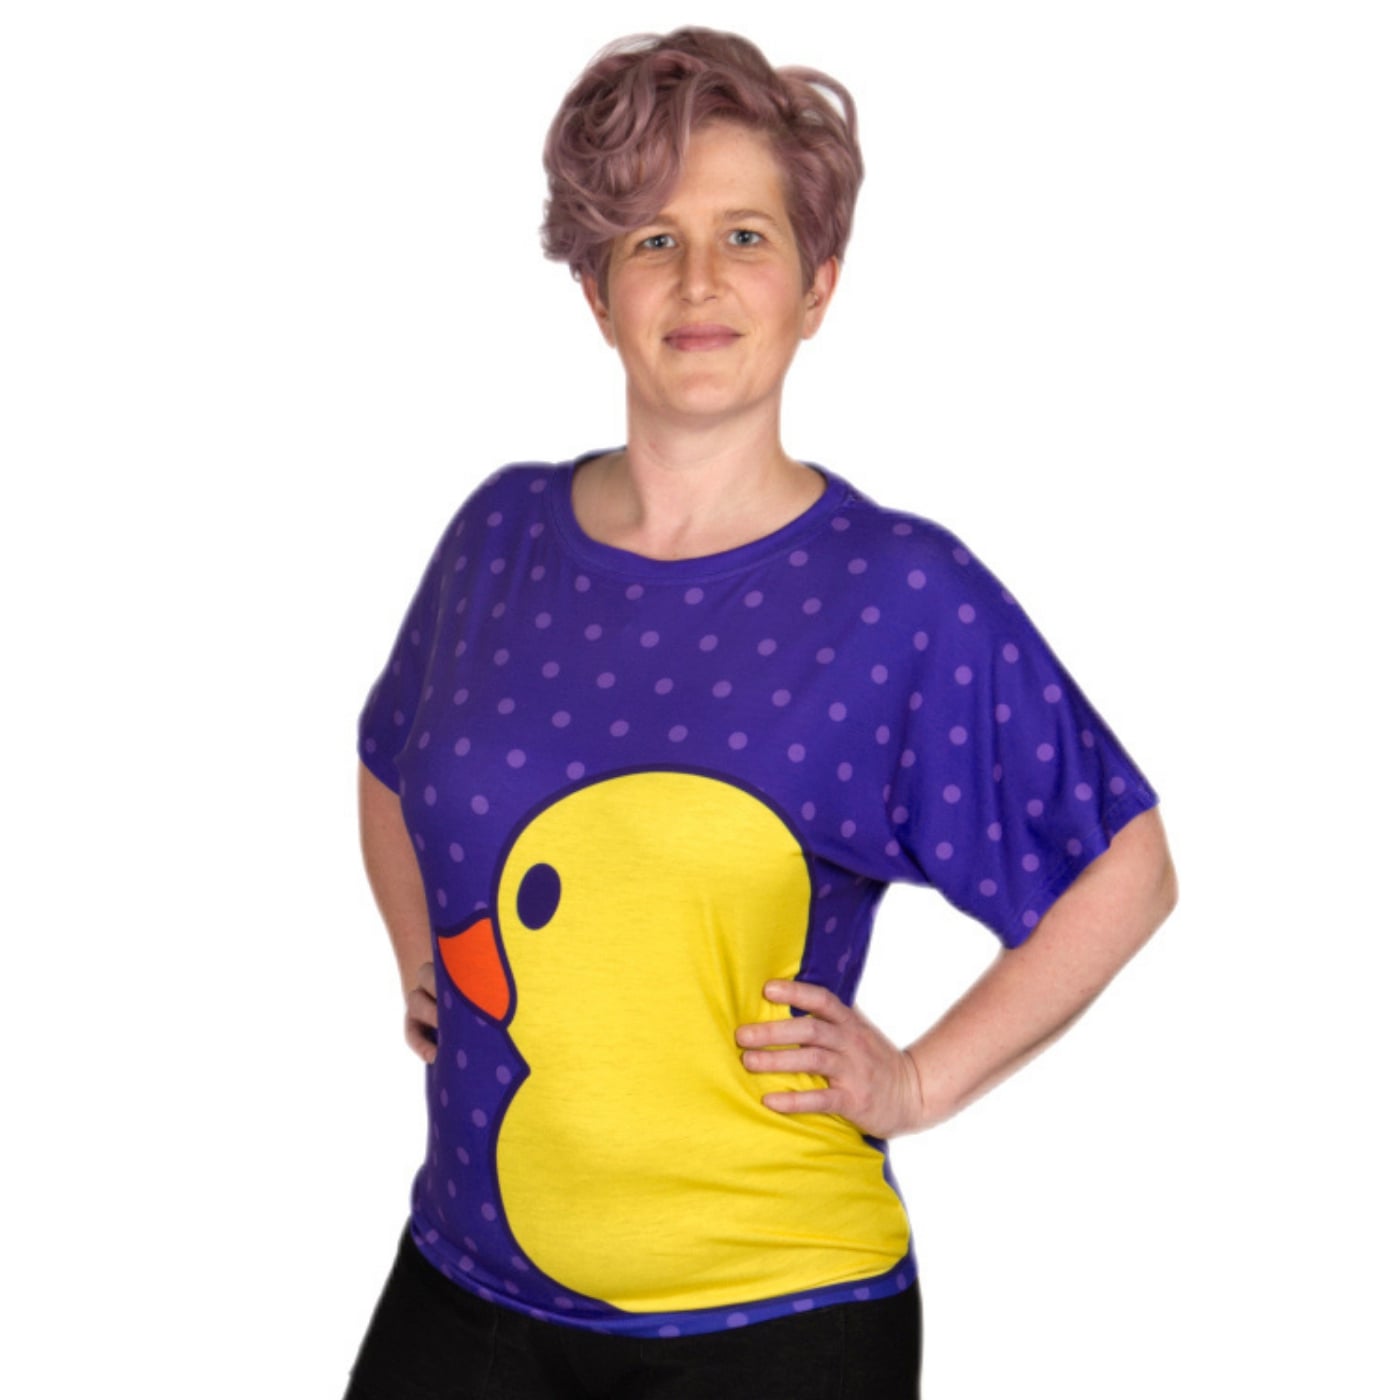 Yellow Ducky Batwing Top by RainbowsAndFairies.com.au (Yellow Duck - Rubber Duck - Ducky - Purple - Vintage Inspired - Kitsch - Knit Top - Mod) - SKU: CL_BATOP_DUCKY_YEL - Pic-07